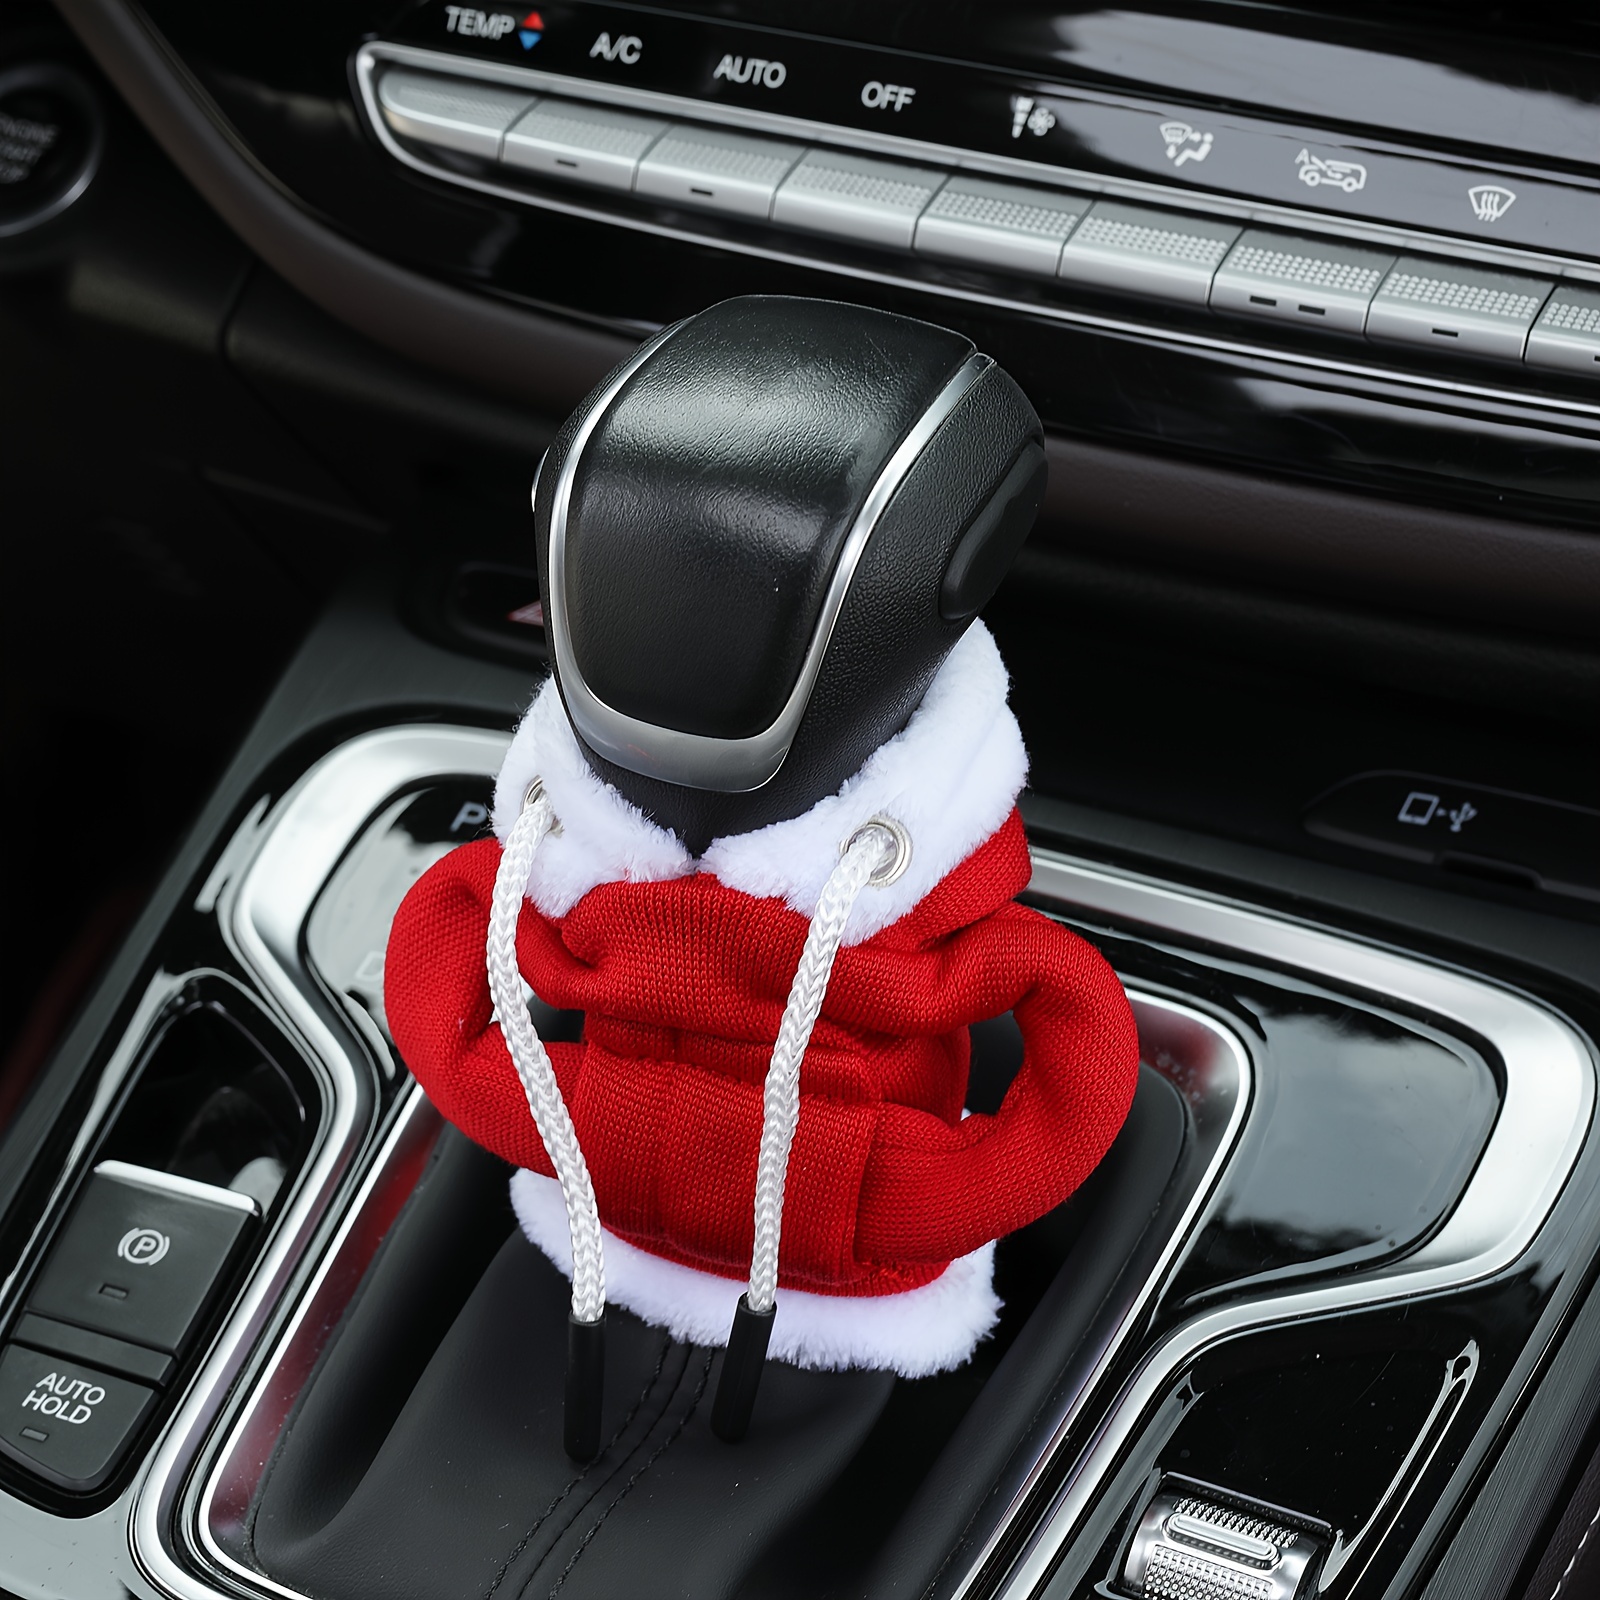 Hoodie Gear Shift Cover, Car Gear Shift Cover Hoodie, Automotive Interior  Novelty Accessories Decorations, Hoodie for Gear Shifter Knob, Shift Knob  Hoodie, Universal Gear Shift Knob Cover Gift(Red) 